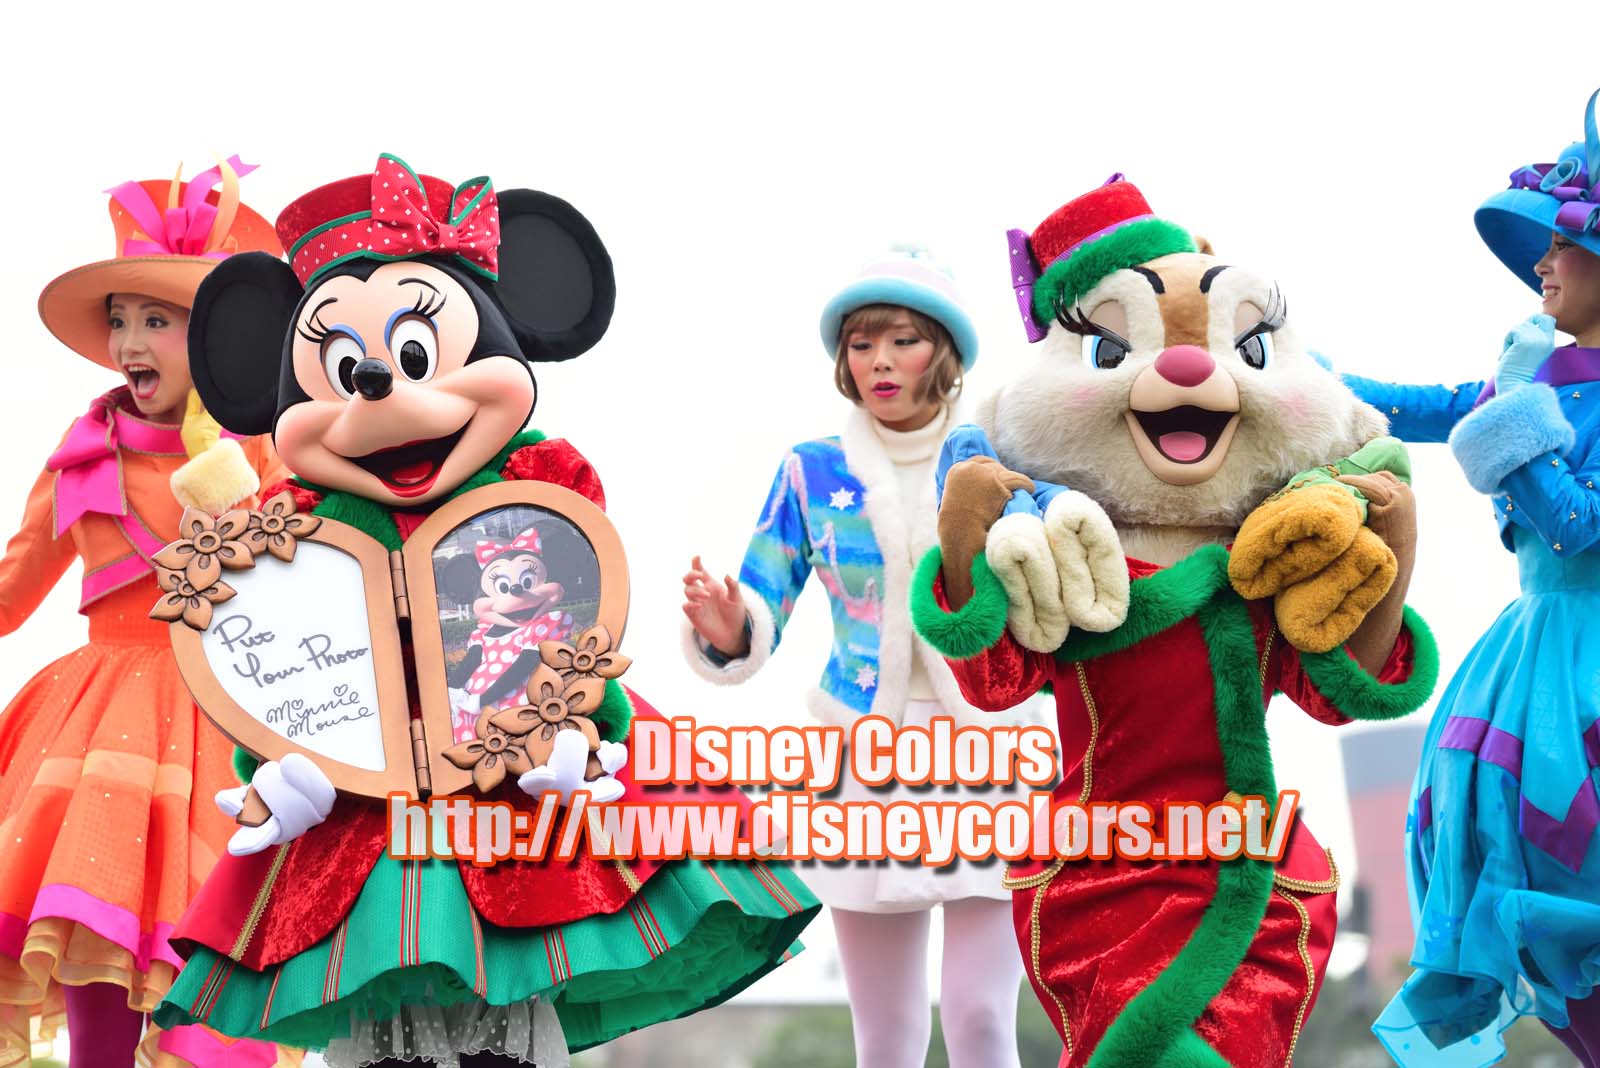 Tds パーフェクト クリスマス16 鑑賞ガイド Disney Colors Event Guide